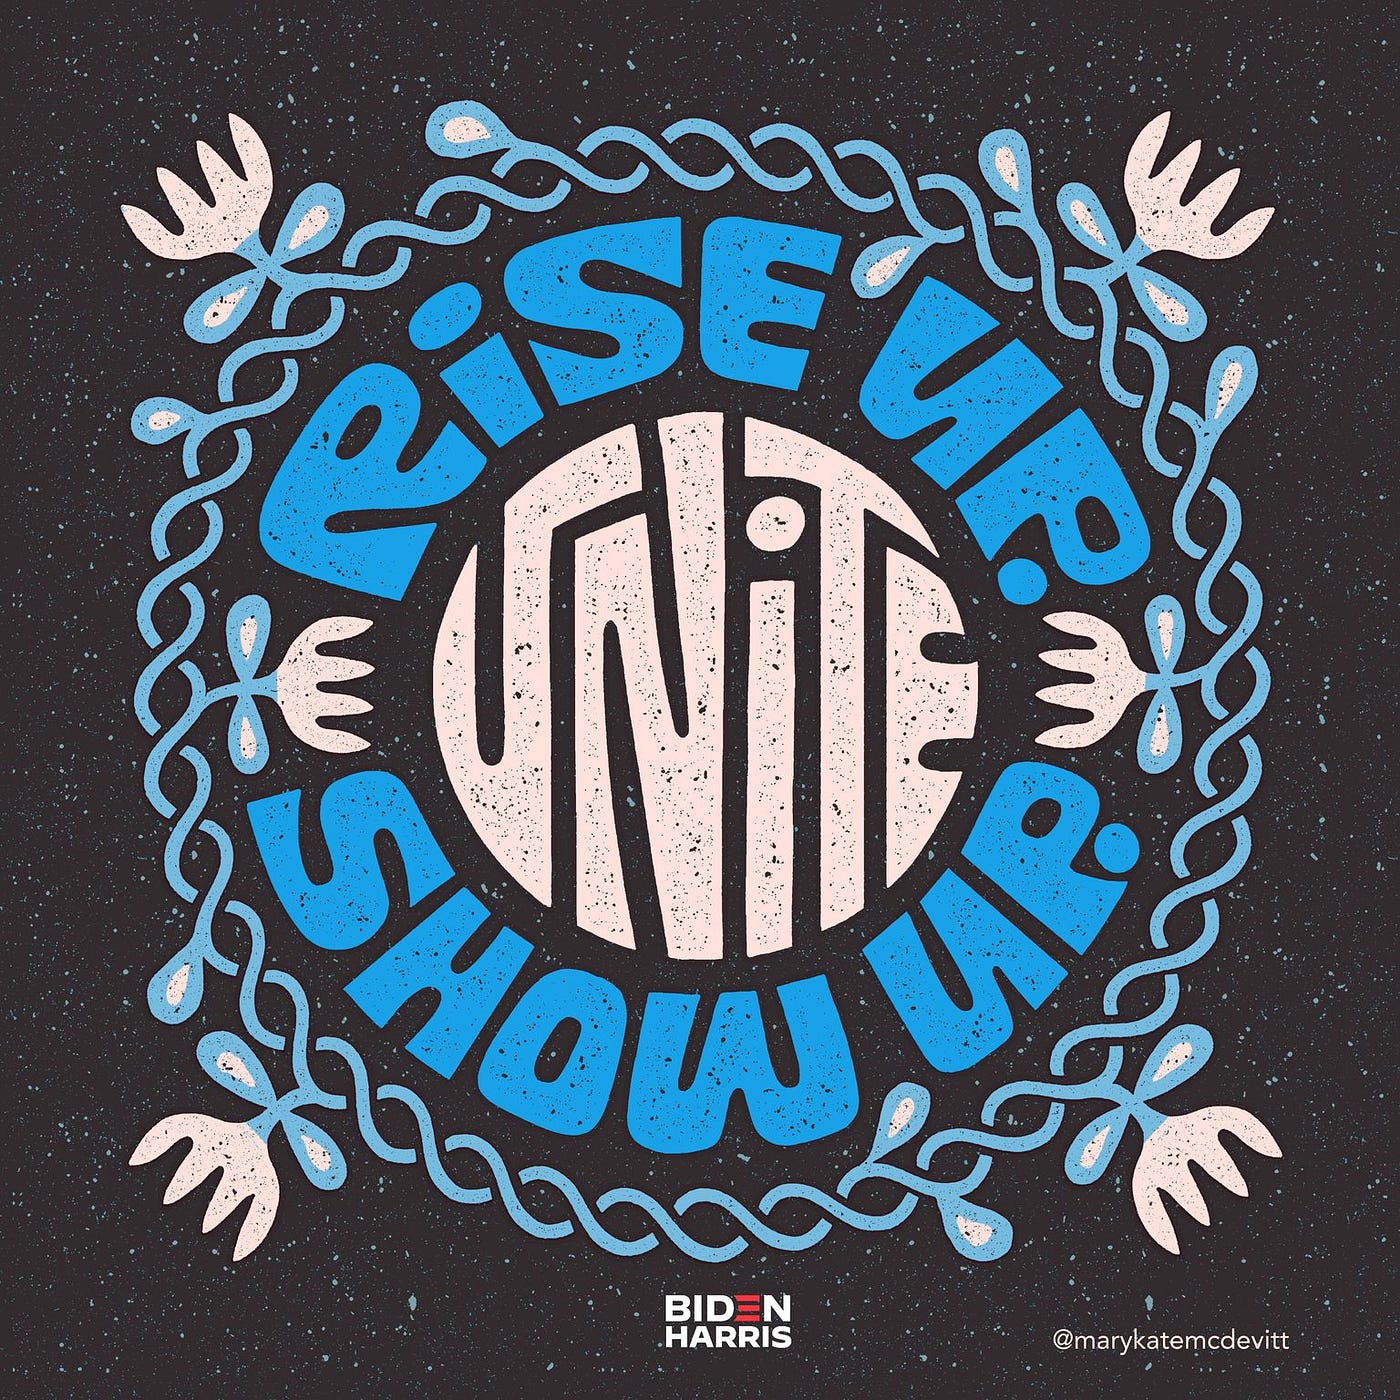 Lettering art of the phrase 'Rise up. Show up. Unite!' by Mary Kate McDevitt